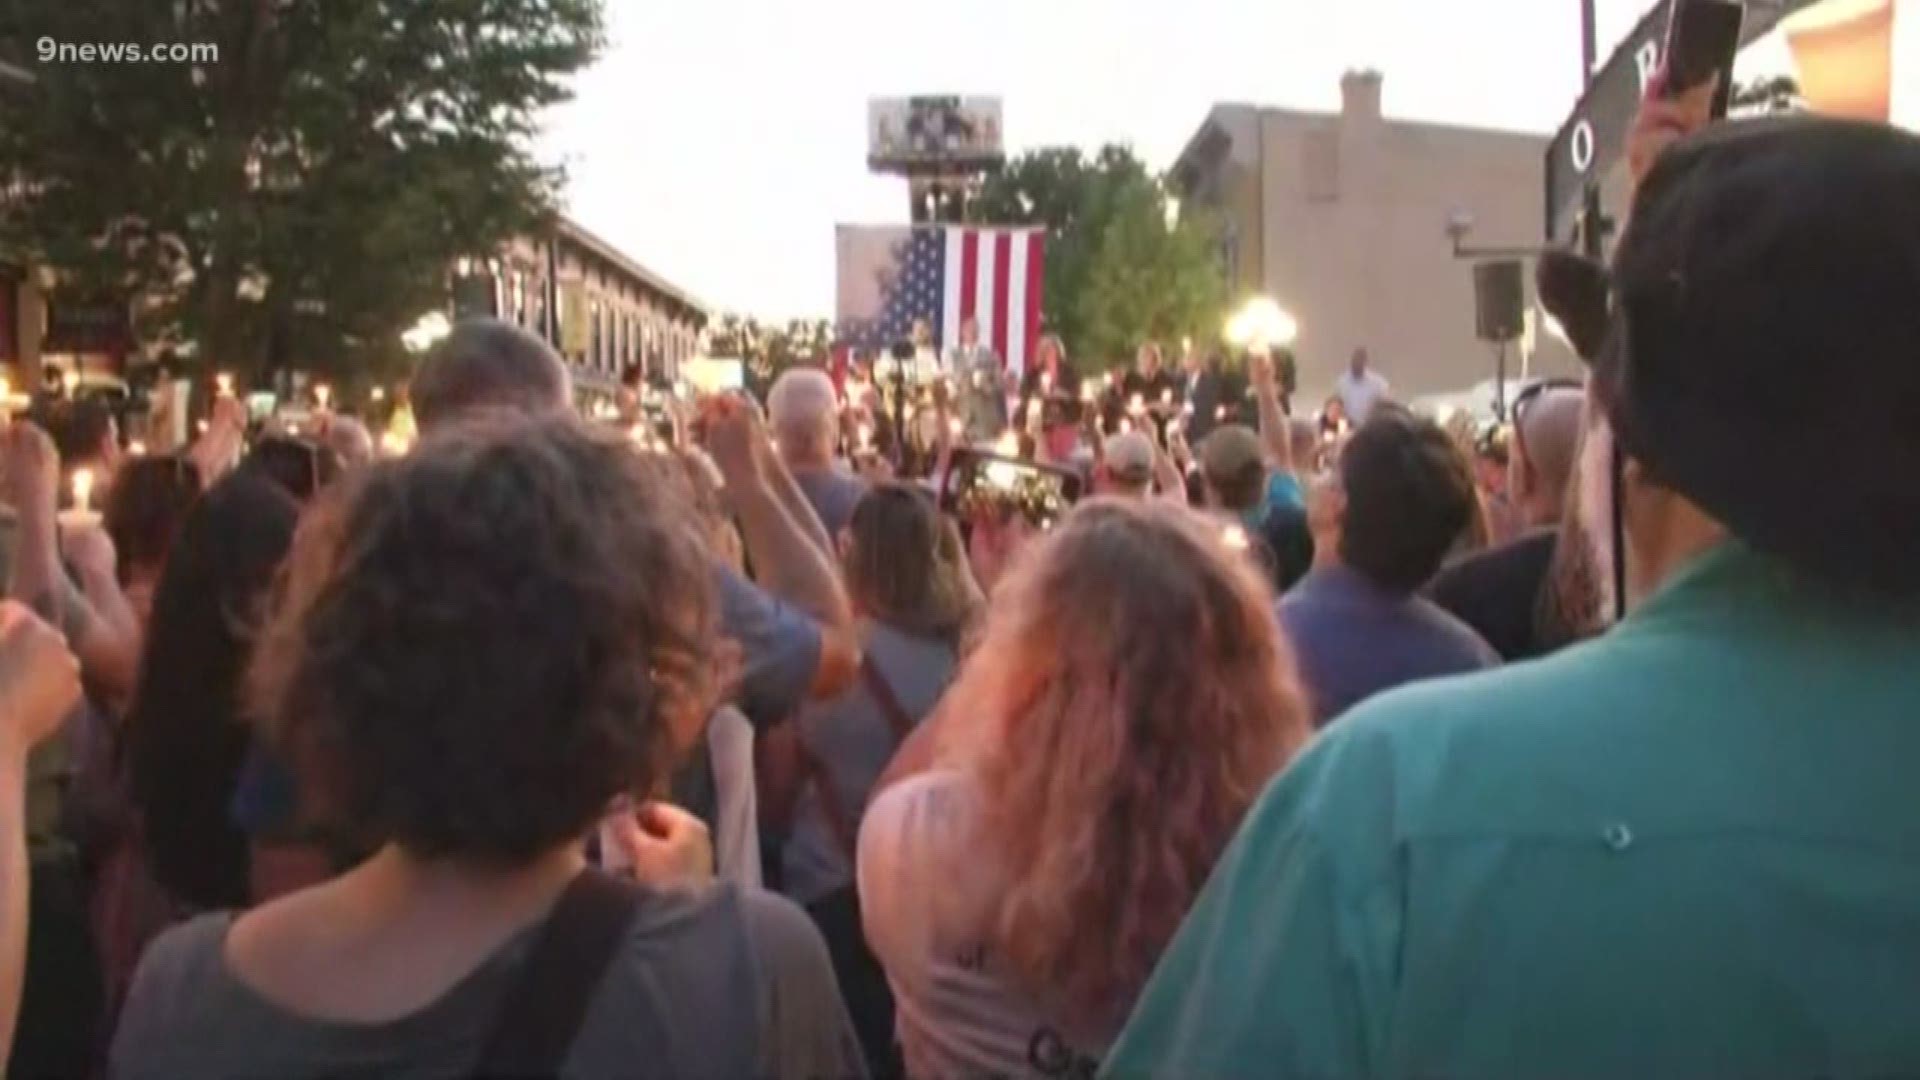 Candlelight illuminated the night skies in El Paso, Texas, and Dayton, Ohio, as mourners remember 29 people killed in two mass shootings this weekend. Combined more than 50 others were wounded in the two attacks a little more than 13 hours apart.